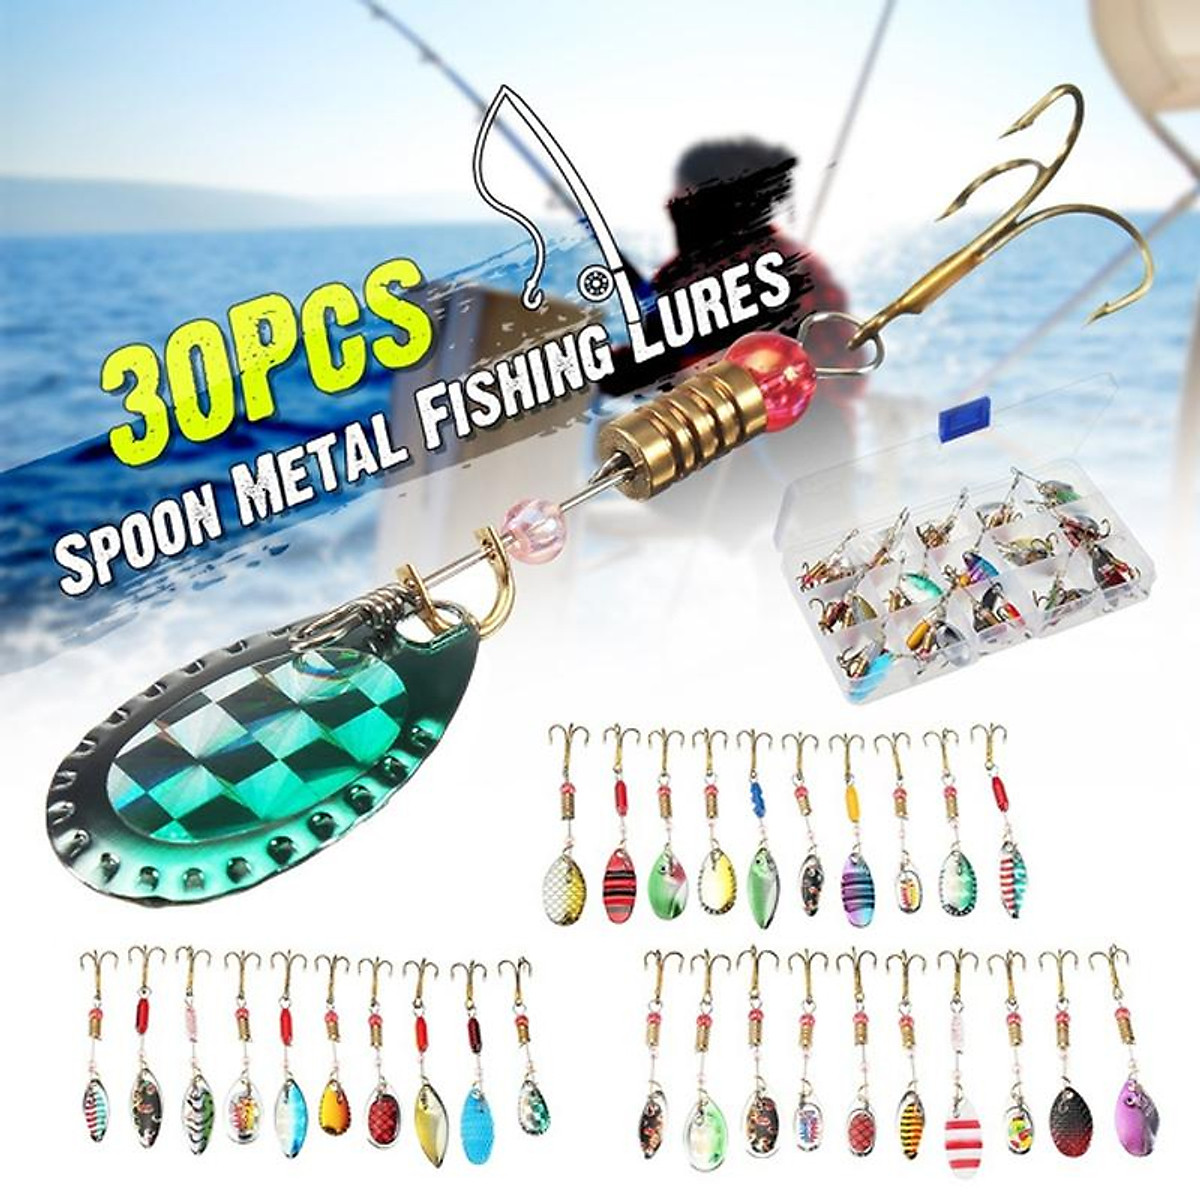 Mua 30 Pcs Metal Spinners Fishing Lure Pike Salmon Baits Bass Trout Fish  Hooks Suitable for Fishing Lovers +Storage box